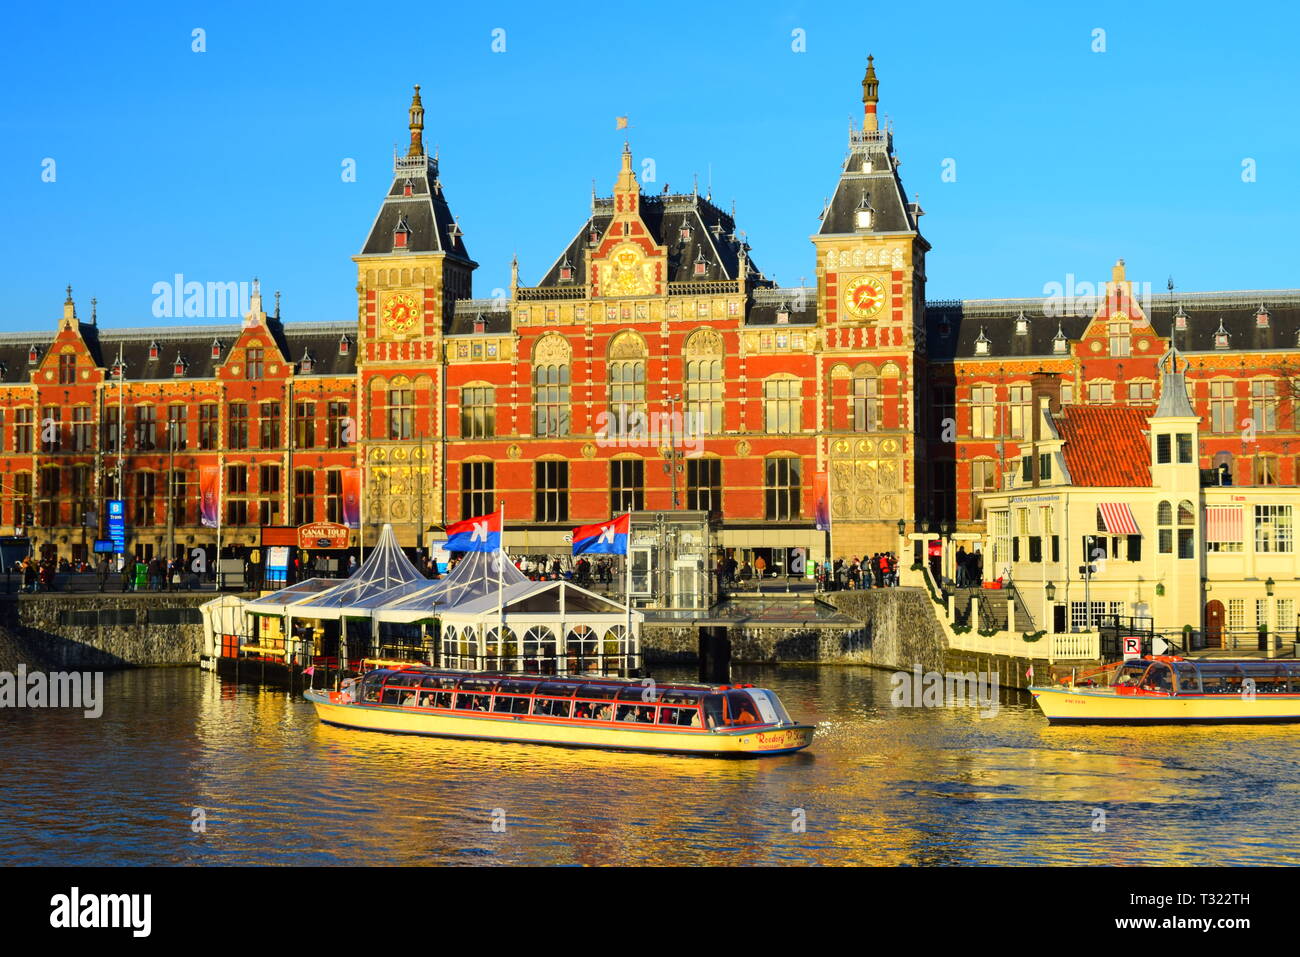 amsterdam - central train station and canal.winter 2019. Stock Photo